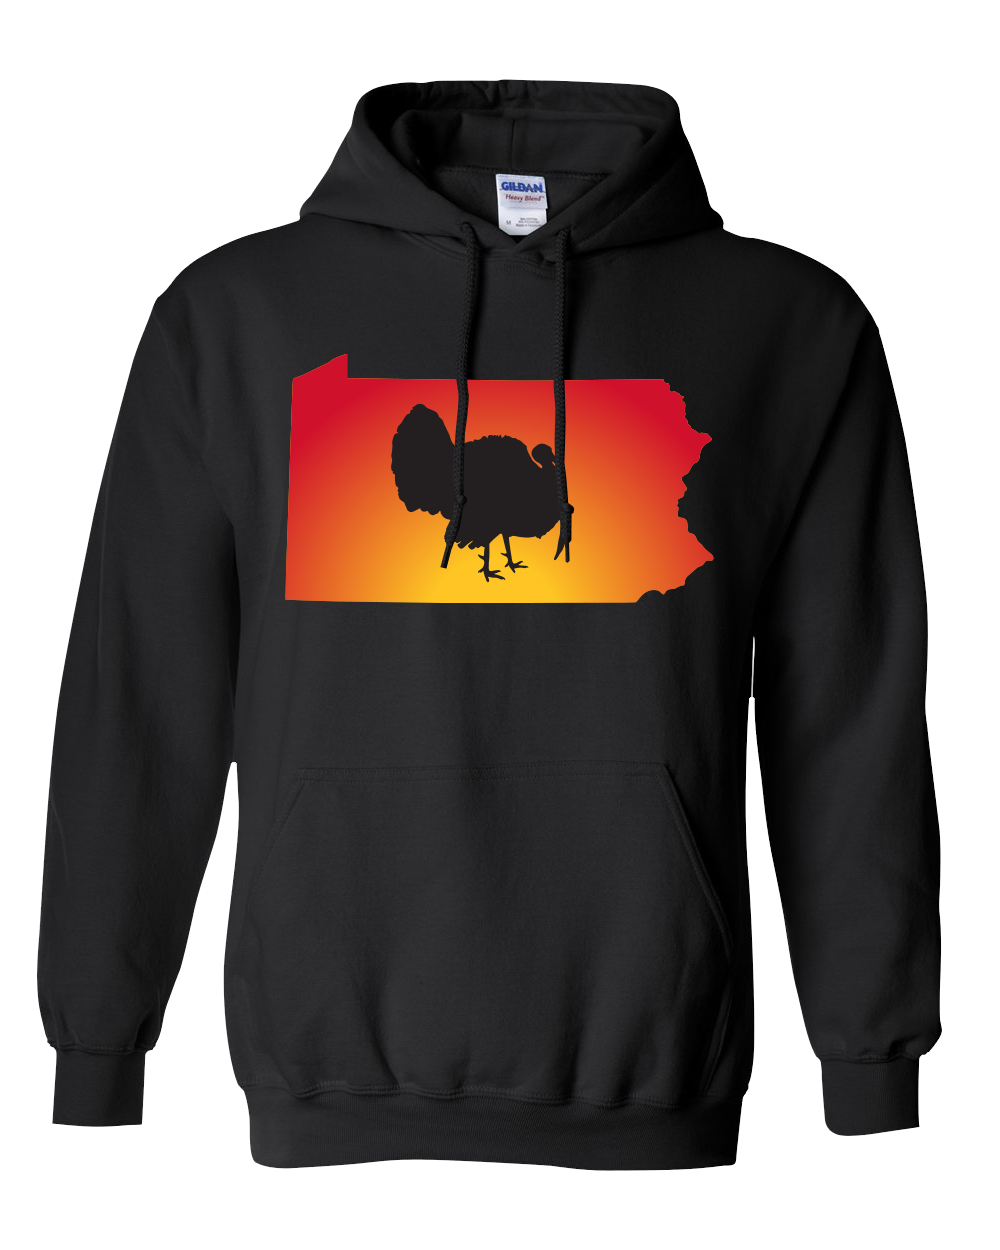 Pullover Hooded Sweatshirt Pennsylvania Black Turkey Vibrant Design High Quality Tight Knit Ring Spun Low Maintenance Cotton Printed With The Newest Available Color Transfer Technology